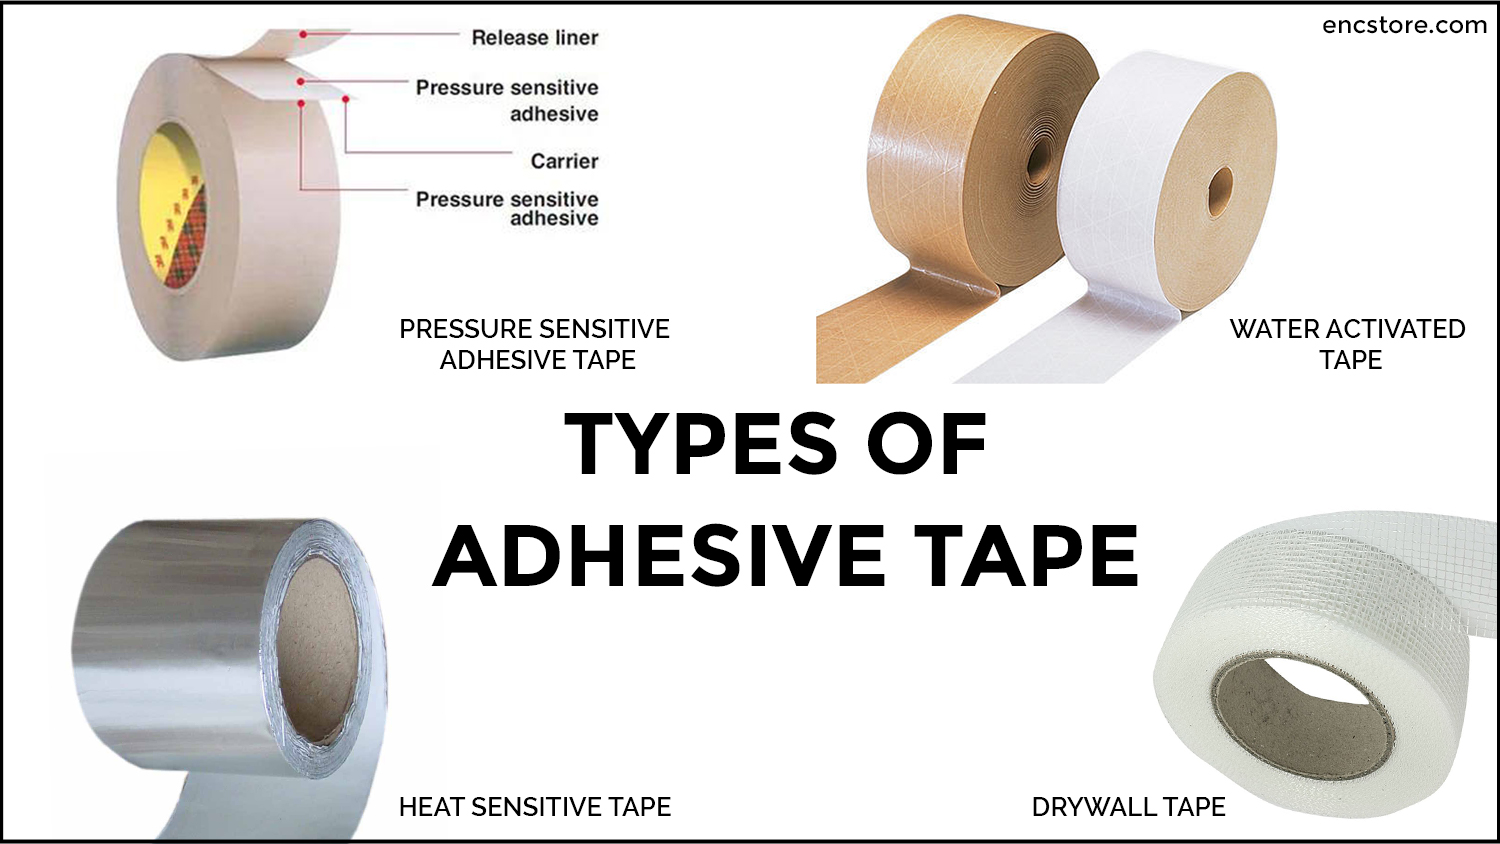 https://www.encstore.com/assets/blogs/1652703659-types-of-adhesive-tape.jpg